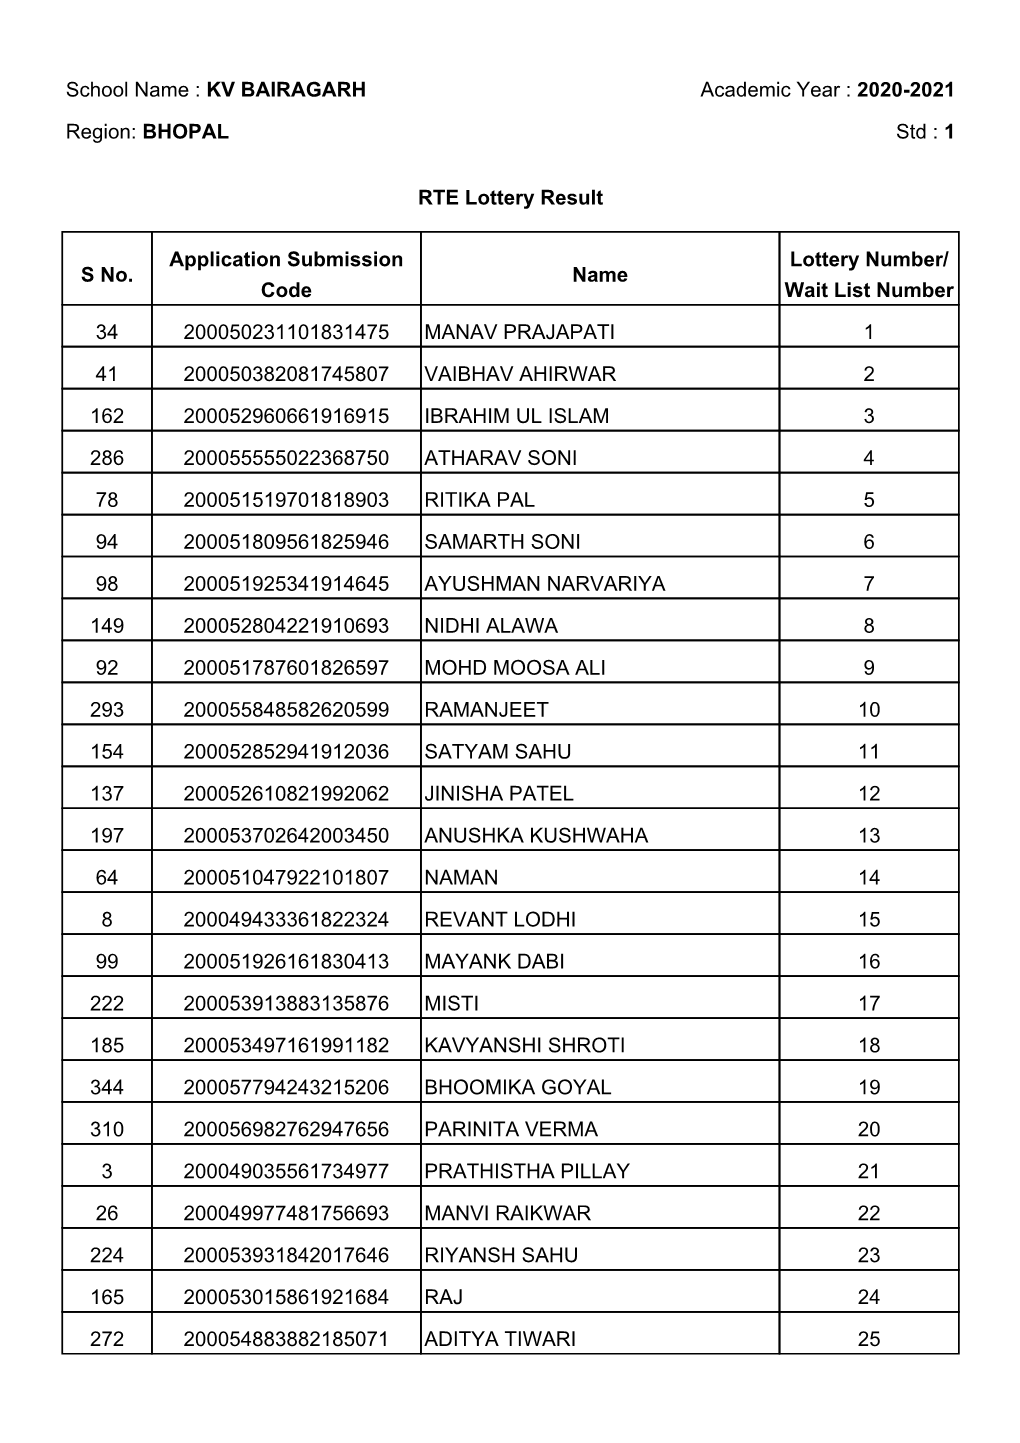 RTE Lottery Result School Name : KV BAIRAGARH Academic Year : 2020-2021 Region: BHOPAL Std : 1 S No. Application Submission Code